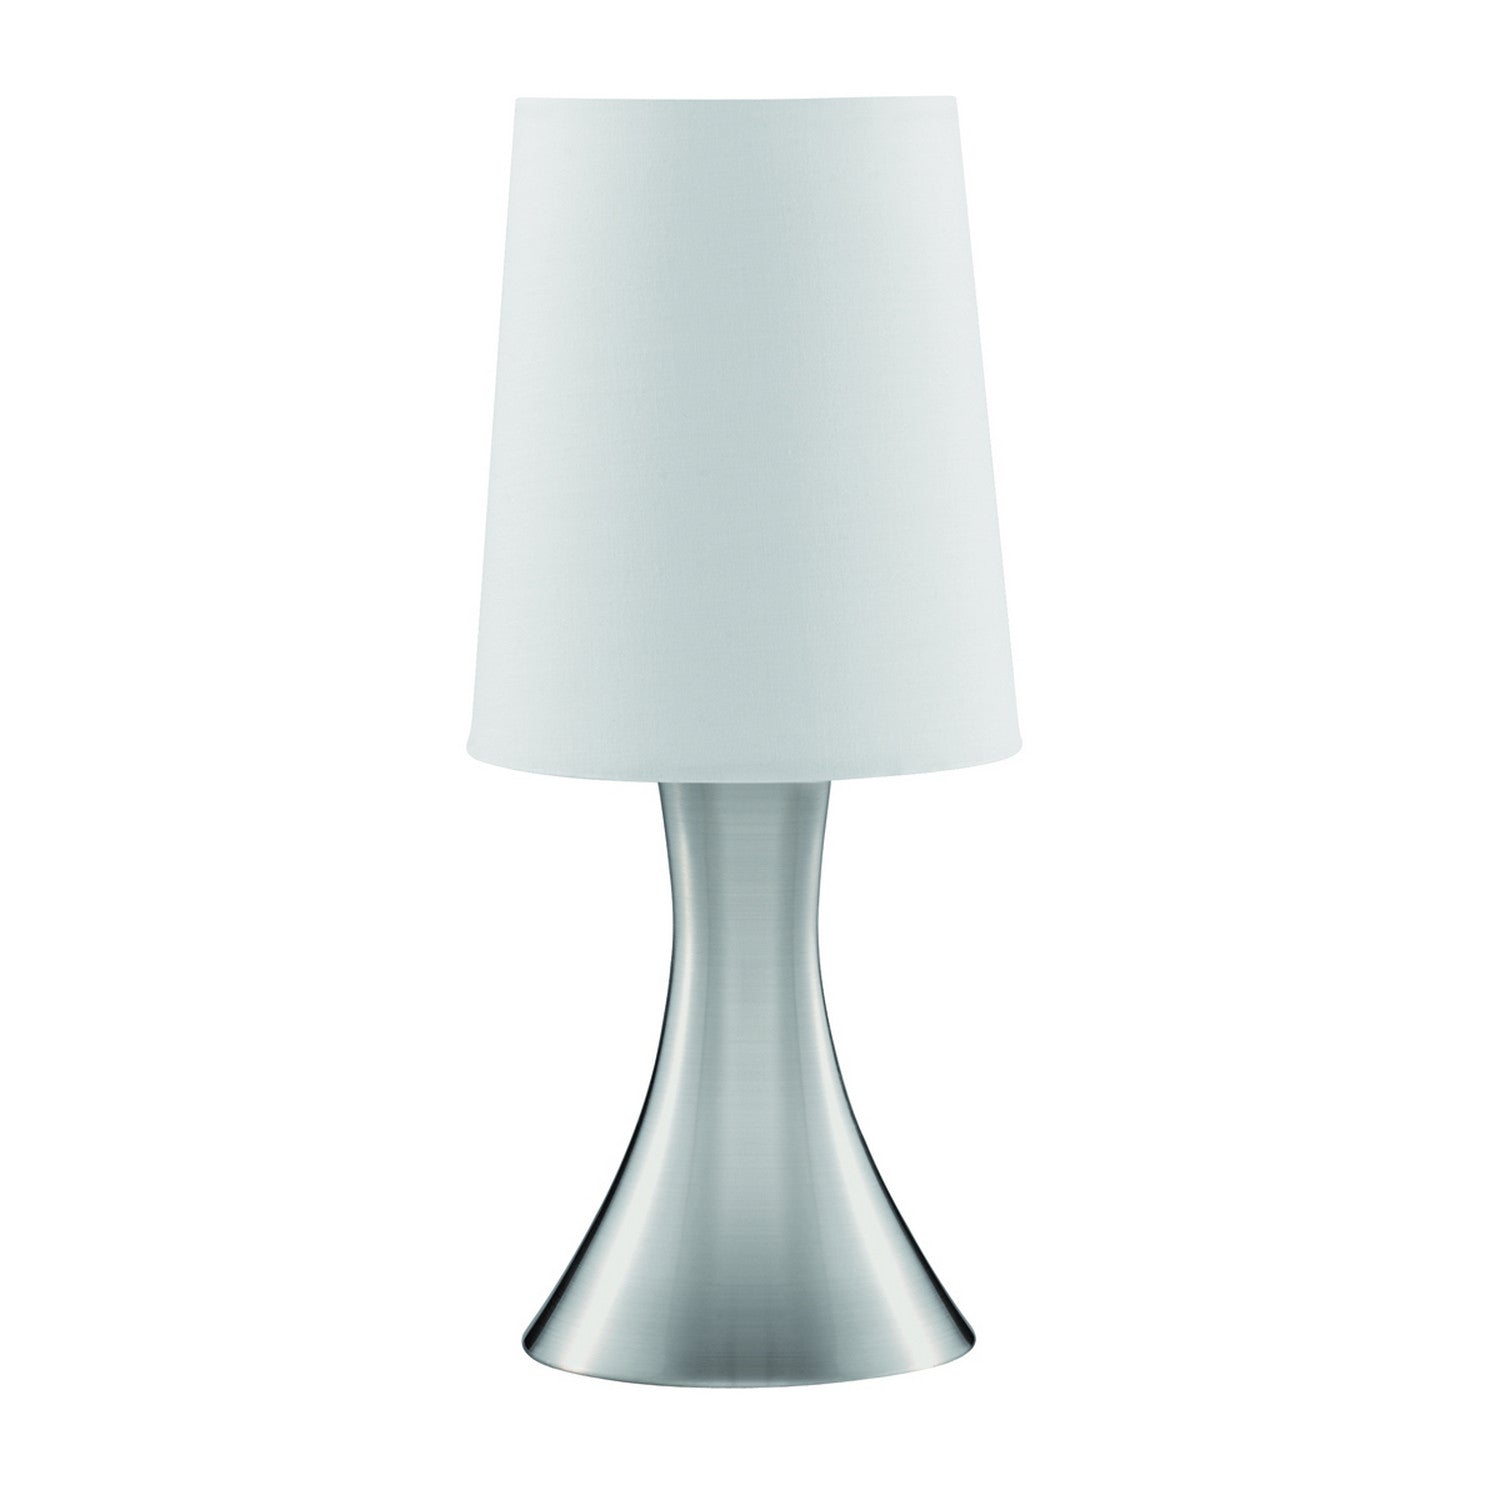 Satin Silver Touch Desk Table Lamp With White Bedside Office Light